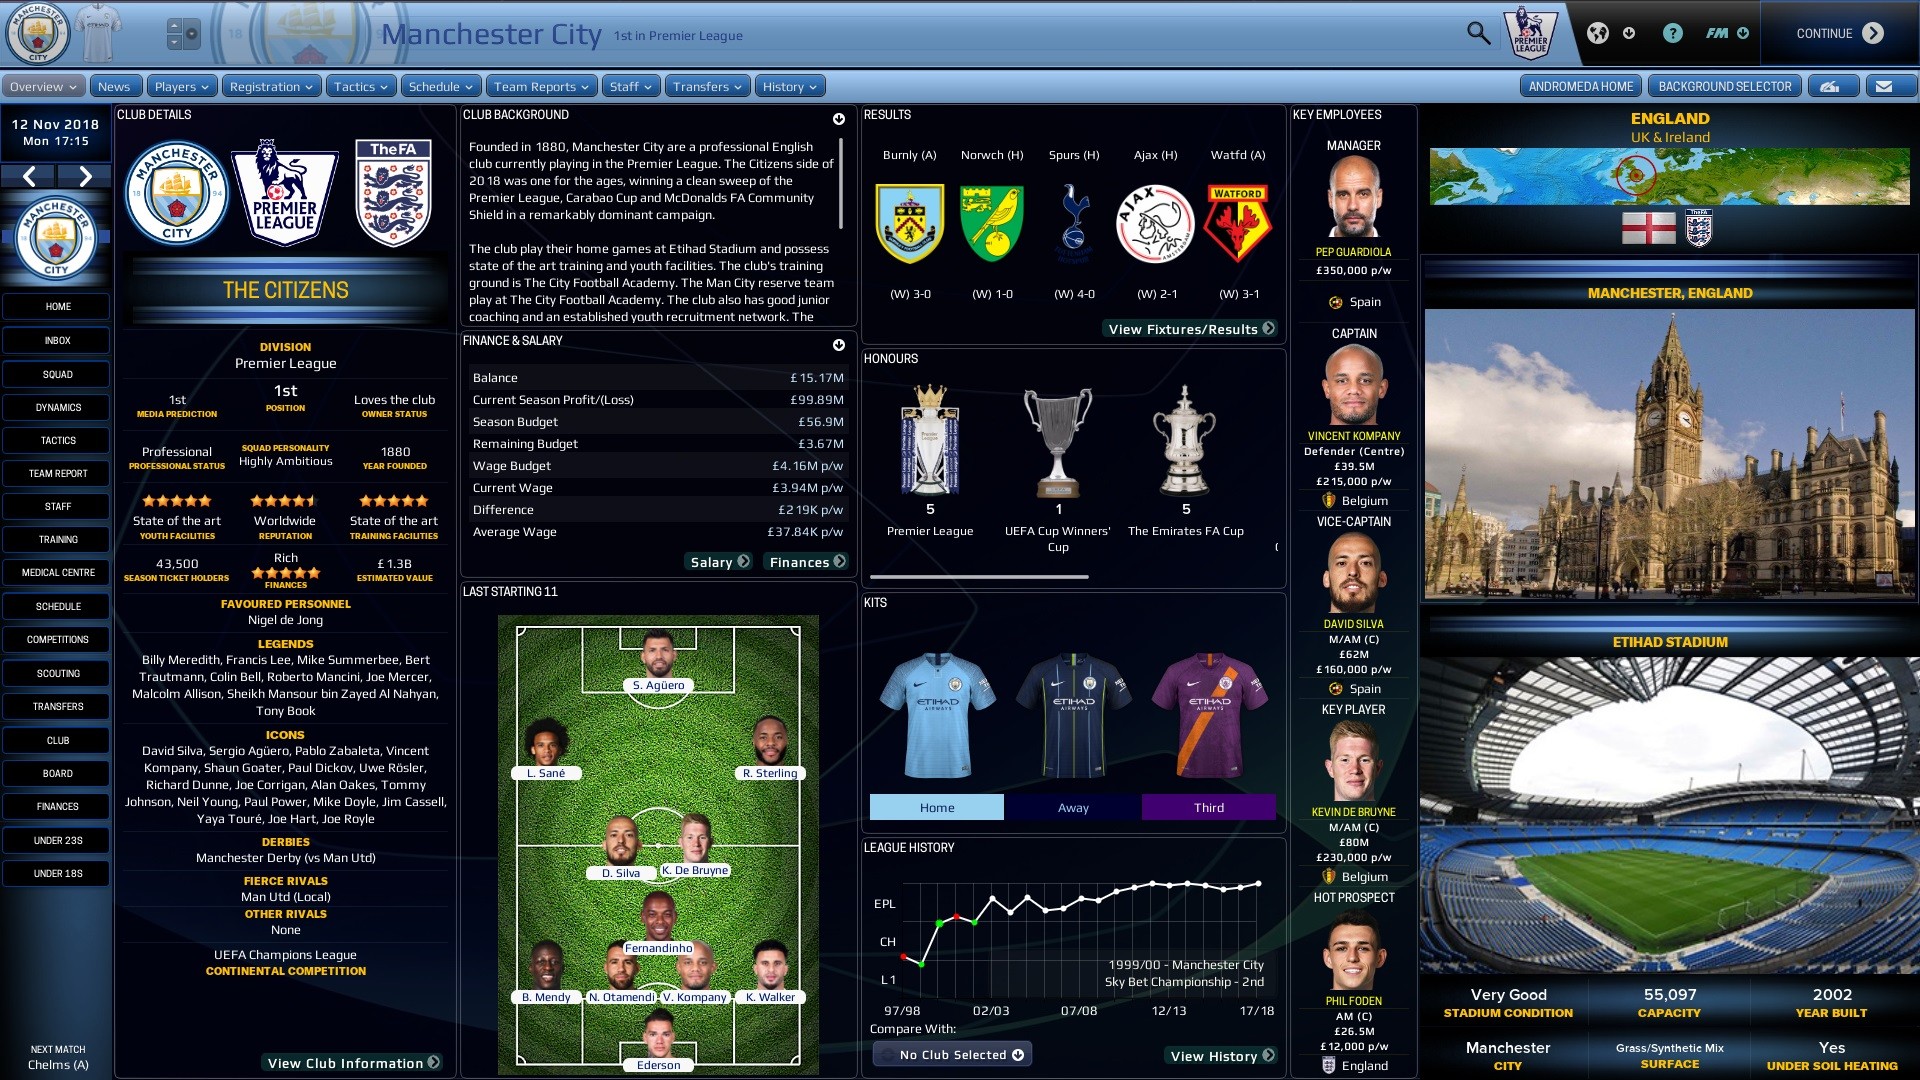 Manchester-City_-Overview-Profile089ef709544539b4.jpg